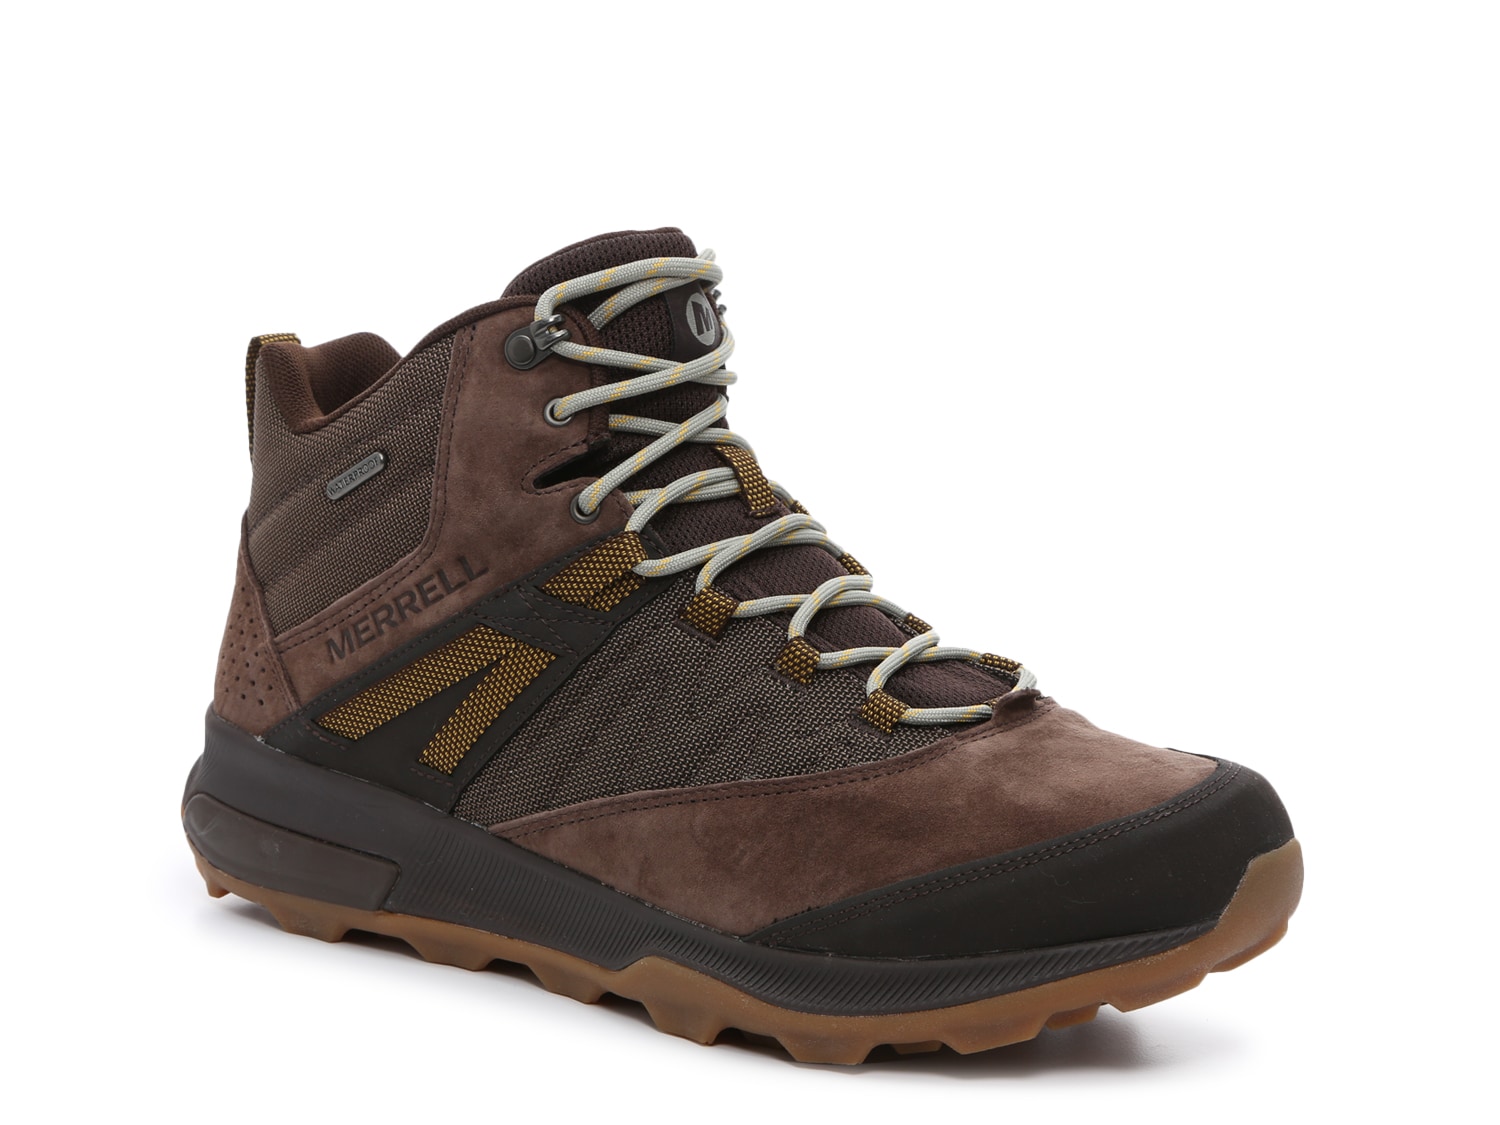 Merrell Zion Approach Hiking Boot - Men's - Free Shipping | DSW